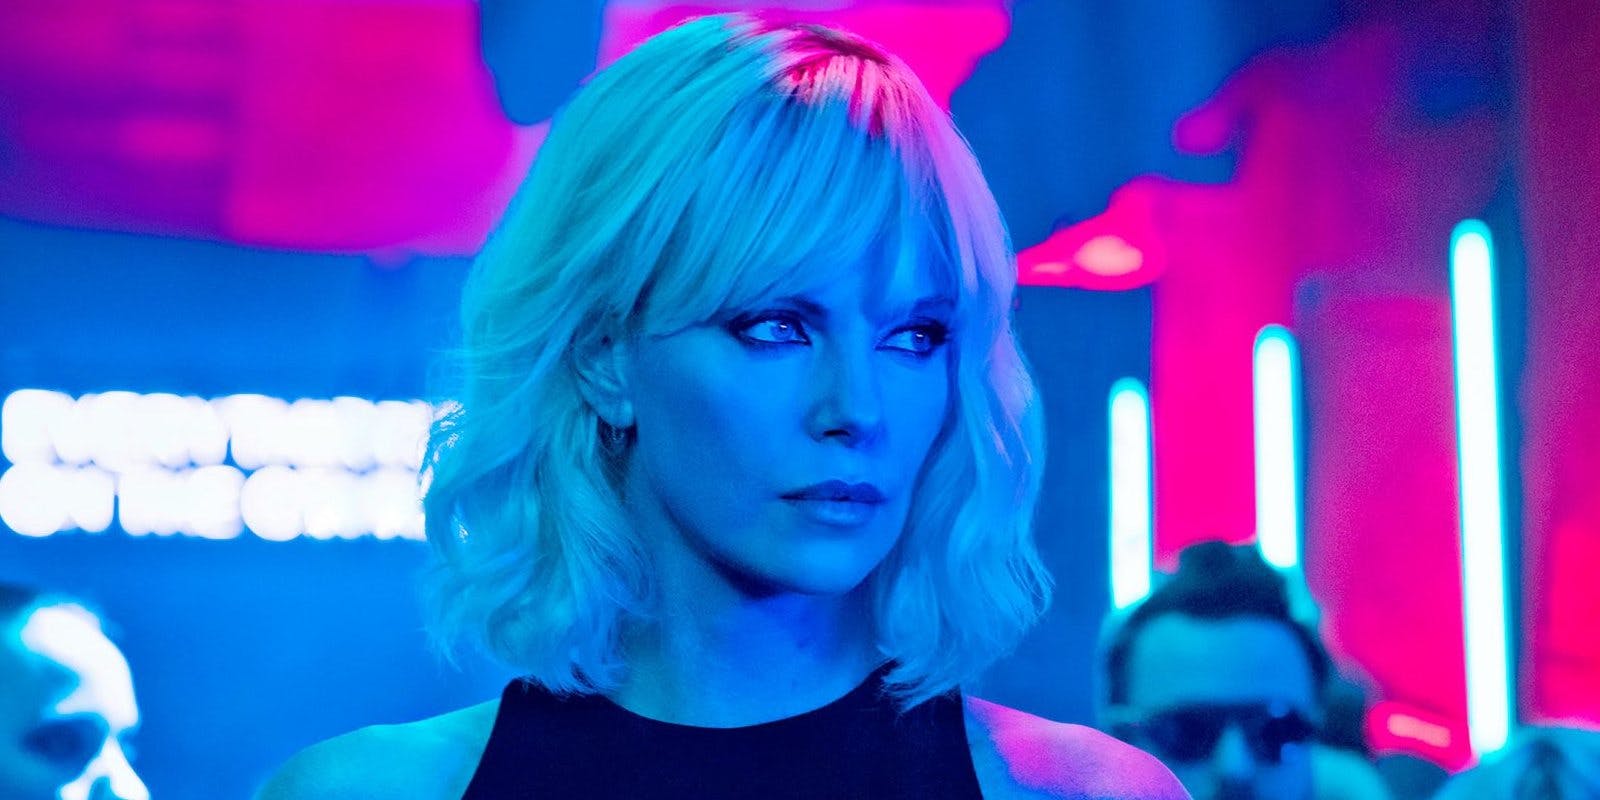 2. How to Achieve Atomic Blonde Hair - wide 8